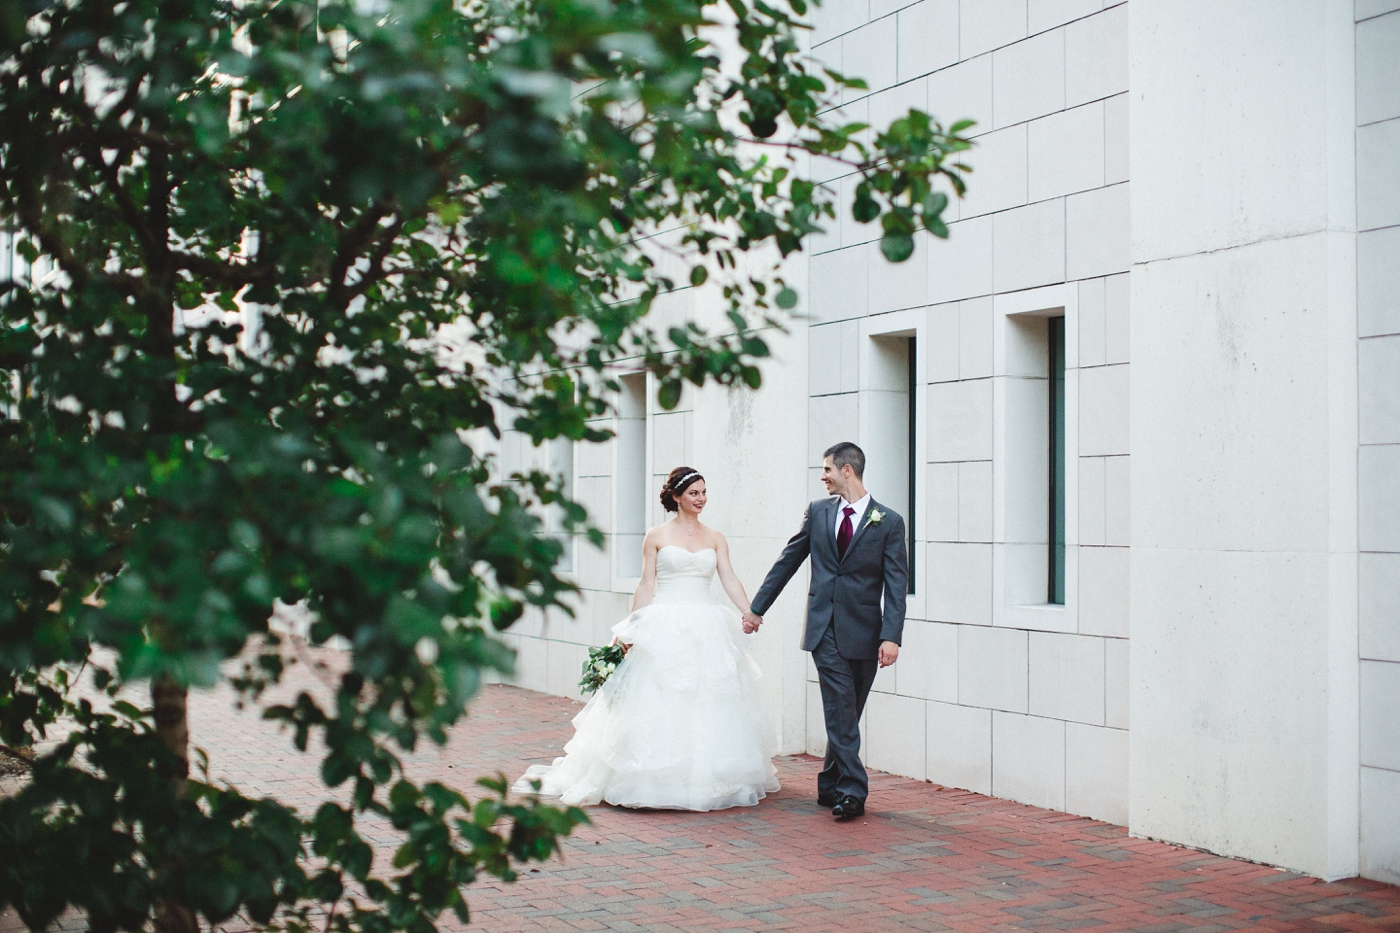 The Top 10 Spots to Elope in Savannah